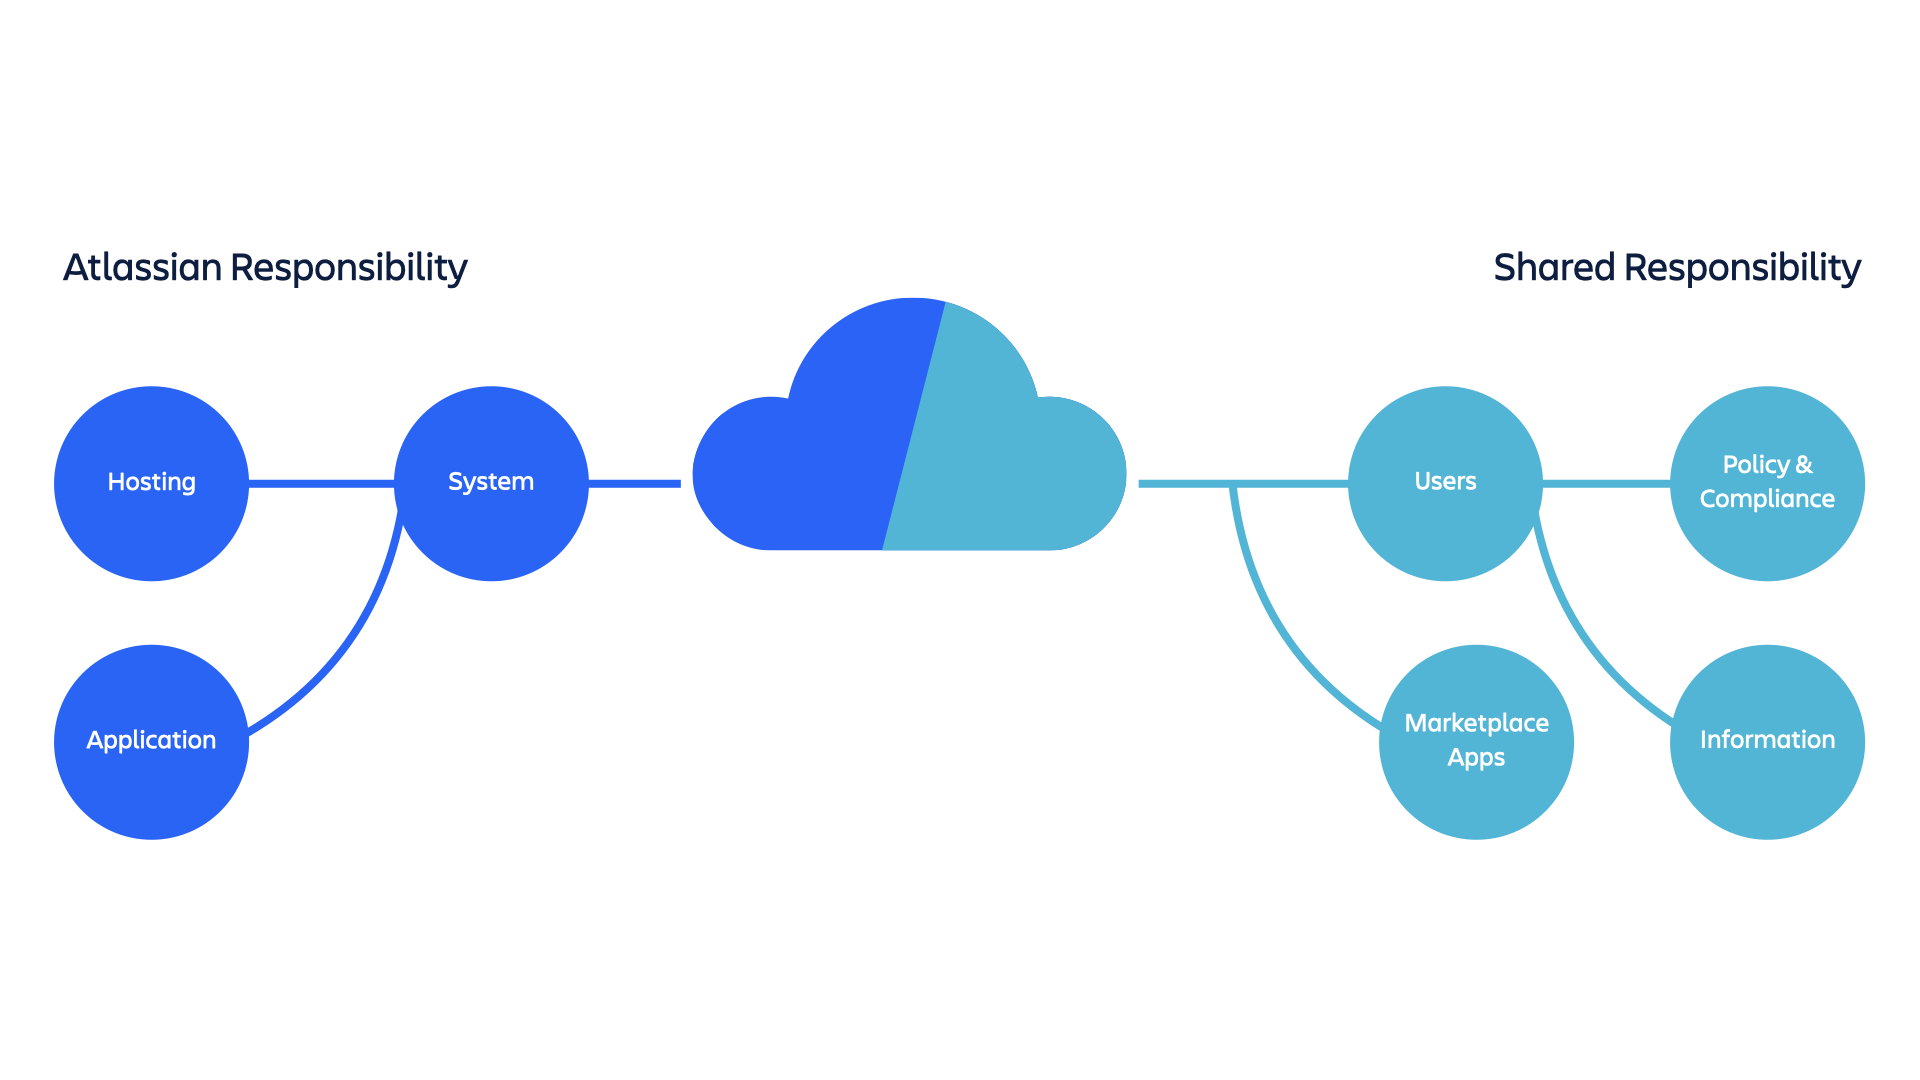 Diagram of Atlassian Responsibility and Shared Responsibility